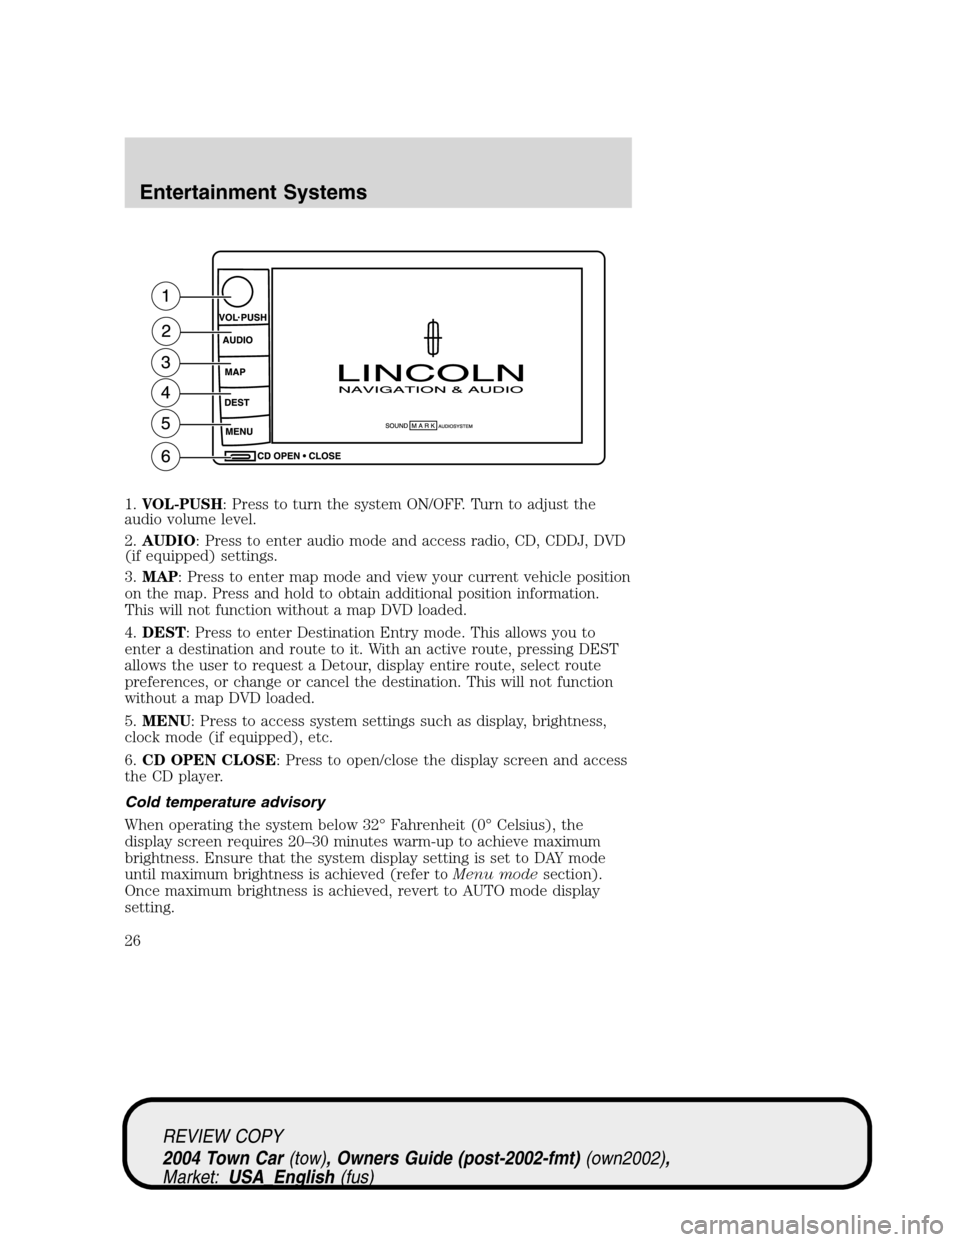 LINCOLN TOWN CAR 2004  Owners Manual 1.VOL-PUSH: Press to turn the system ON/OFF. Turn to adjust the
audio volume level.
2.AUDIO: Press to enter audio mode and access radio, CD, CDDJ, DVD
(if equipped) settings.
3.MAP: Press to enter map